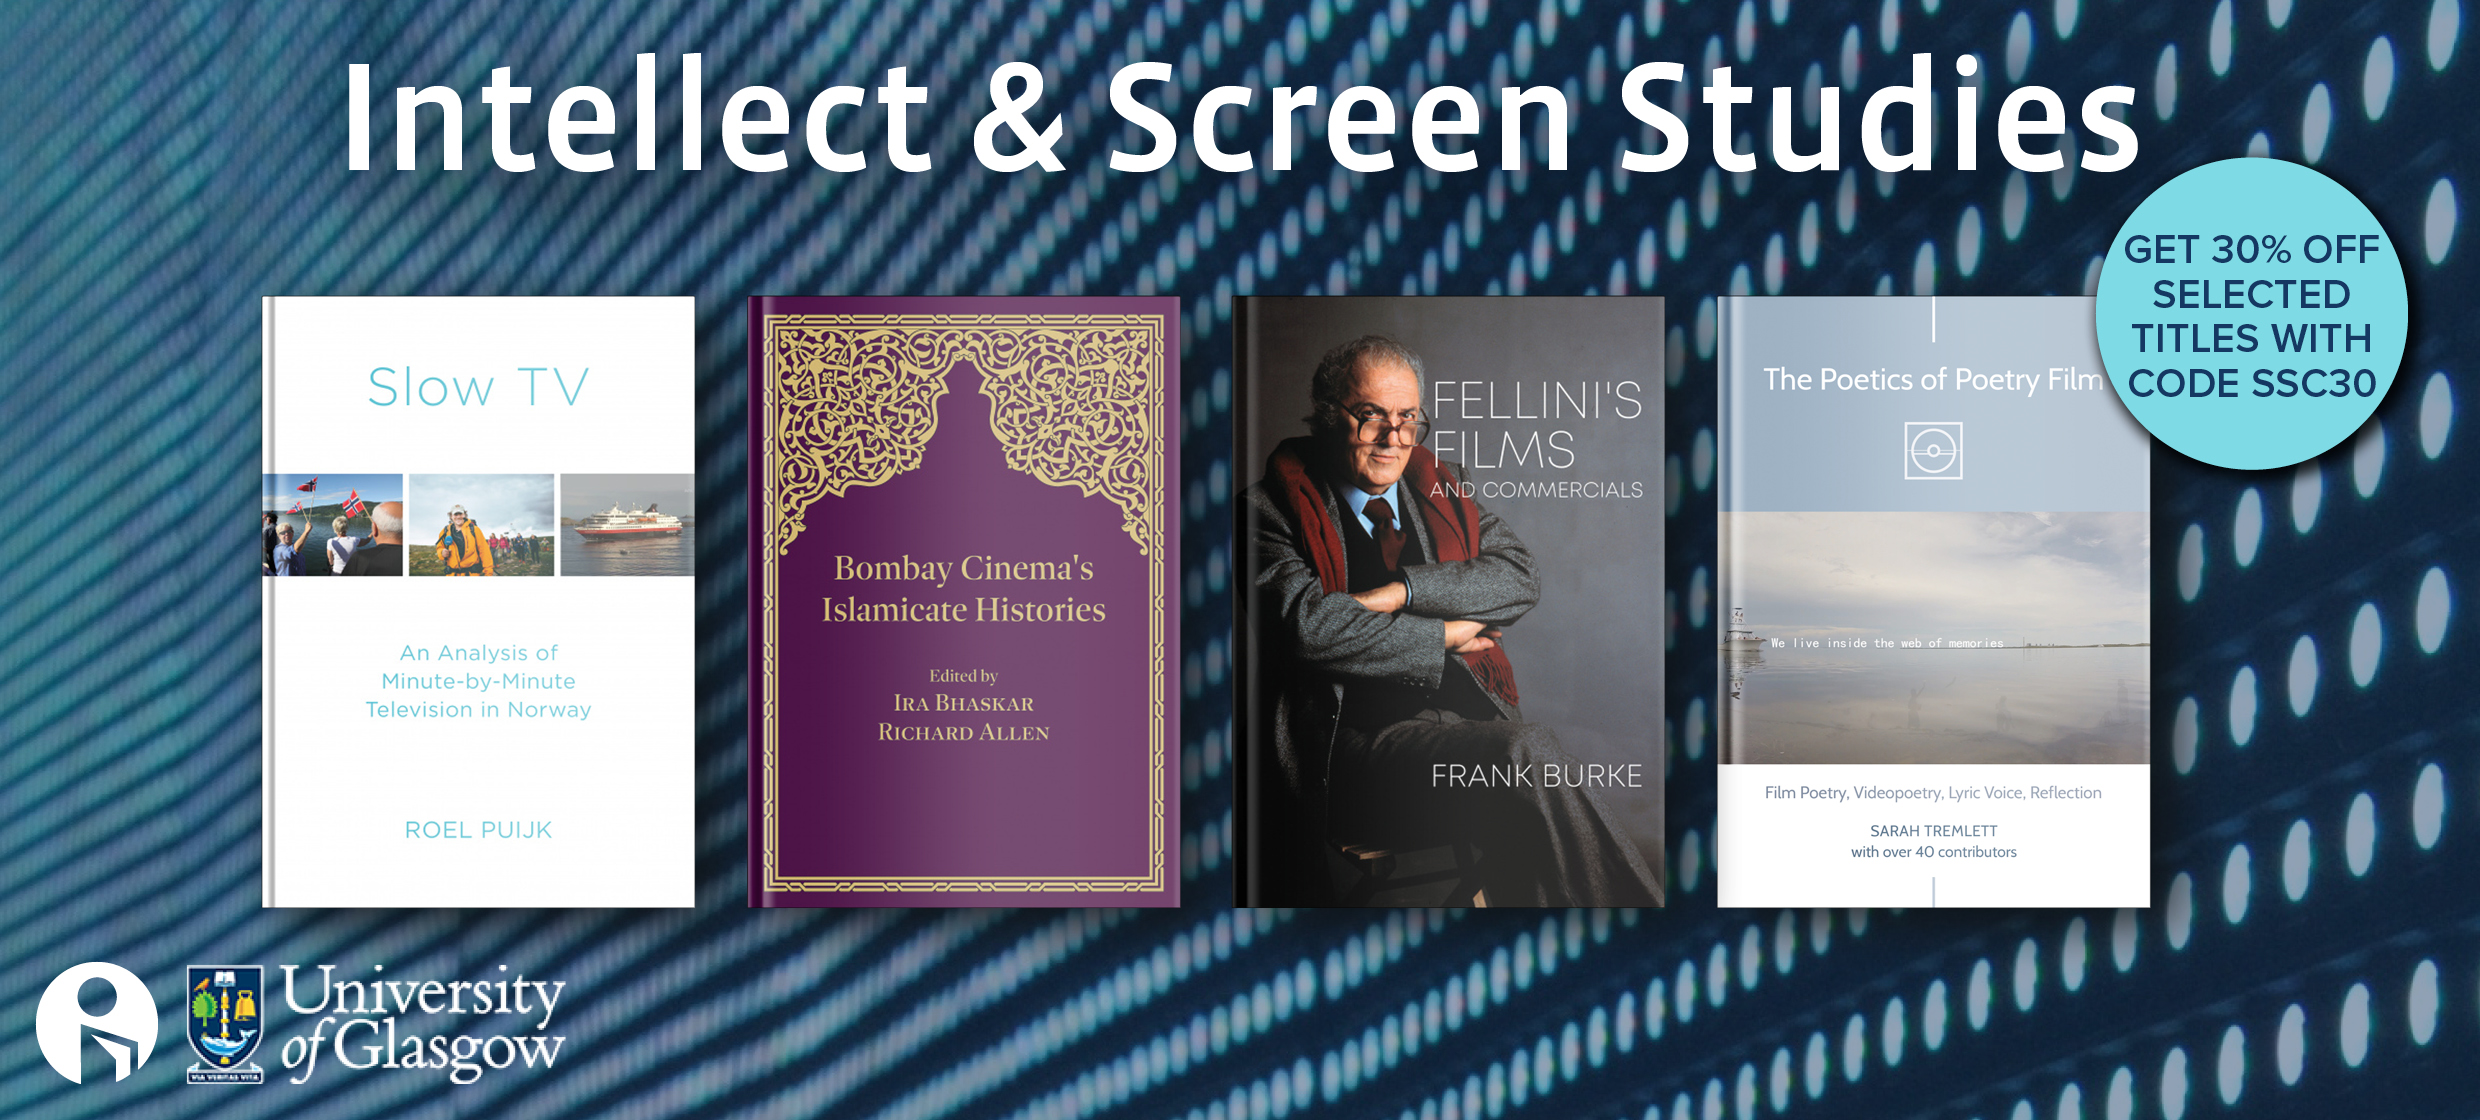 Banner, 4 book covers and the discount code SSC30 for 30% off selected titles